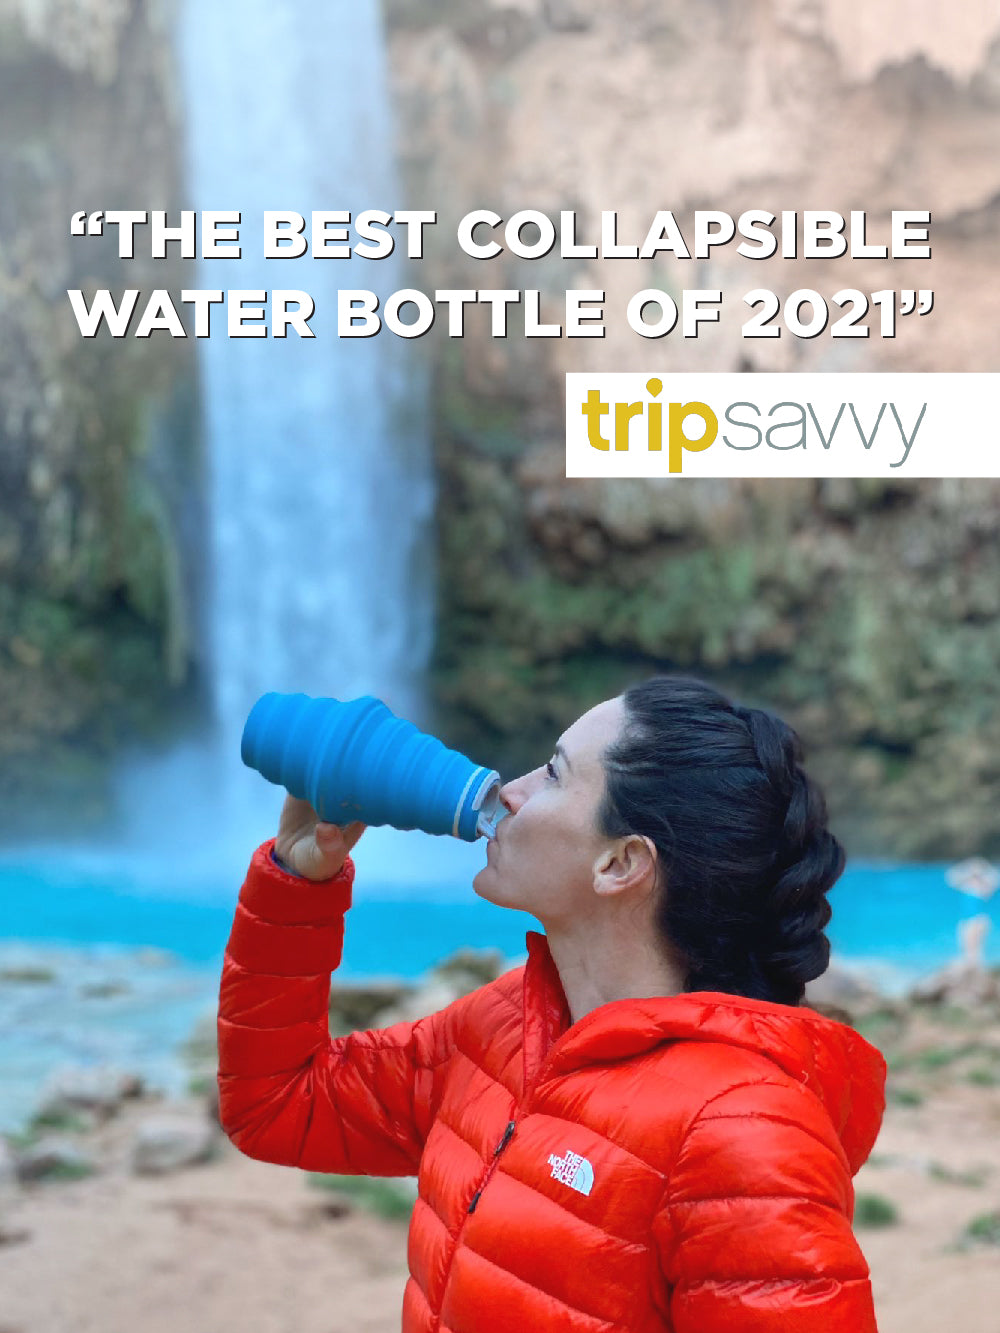 "The Best Collapsible Water Bottle of 2021" Trip Savvy HYDAWAY Collapsible Water Bottles